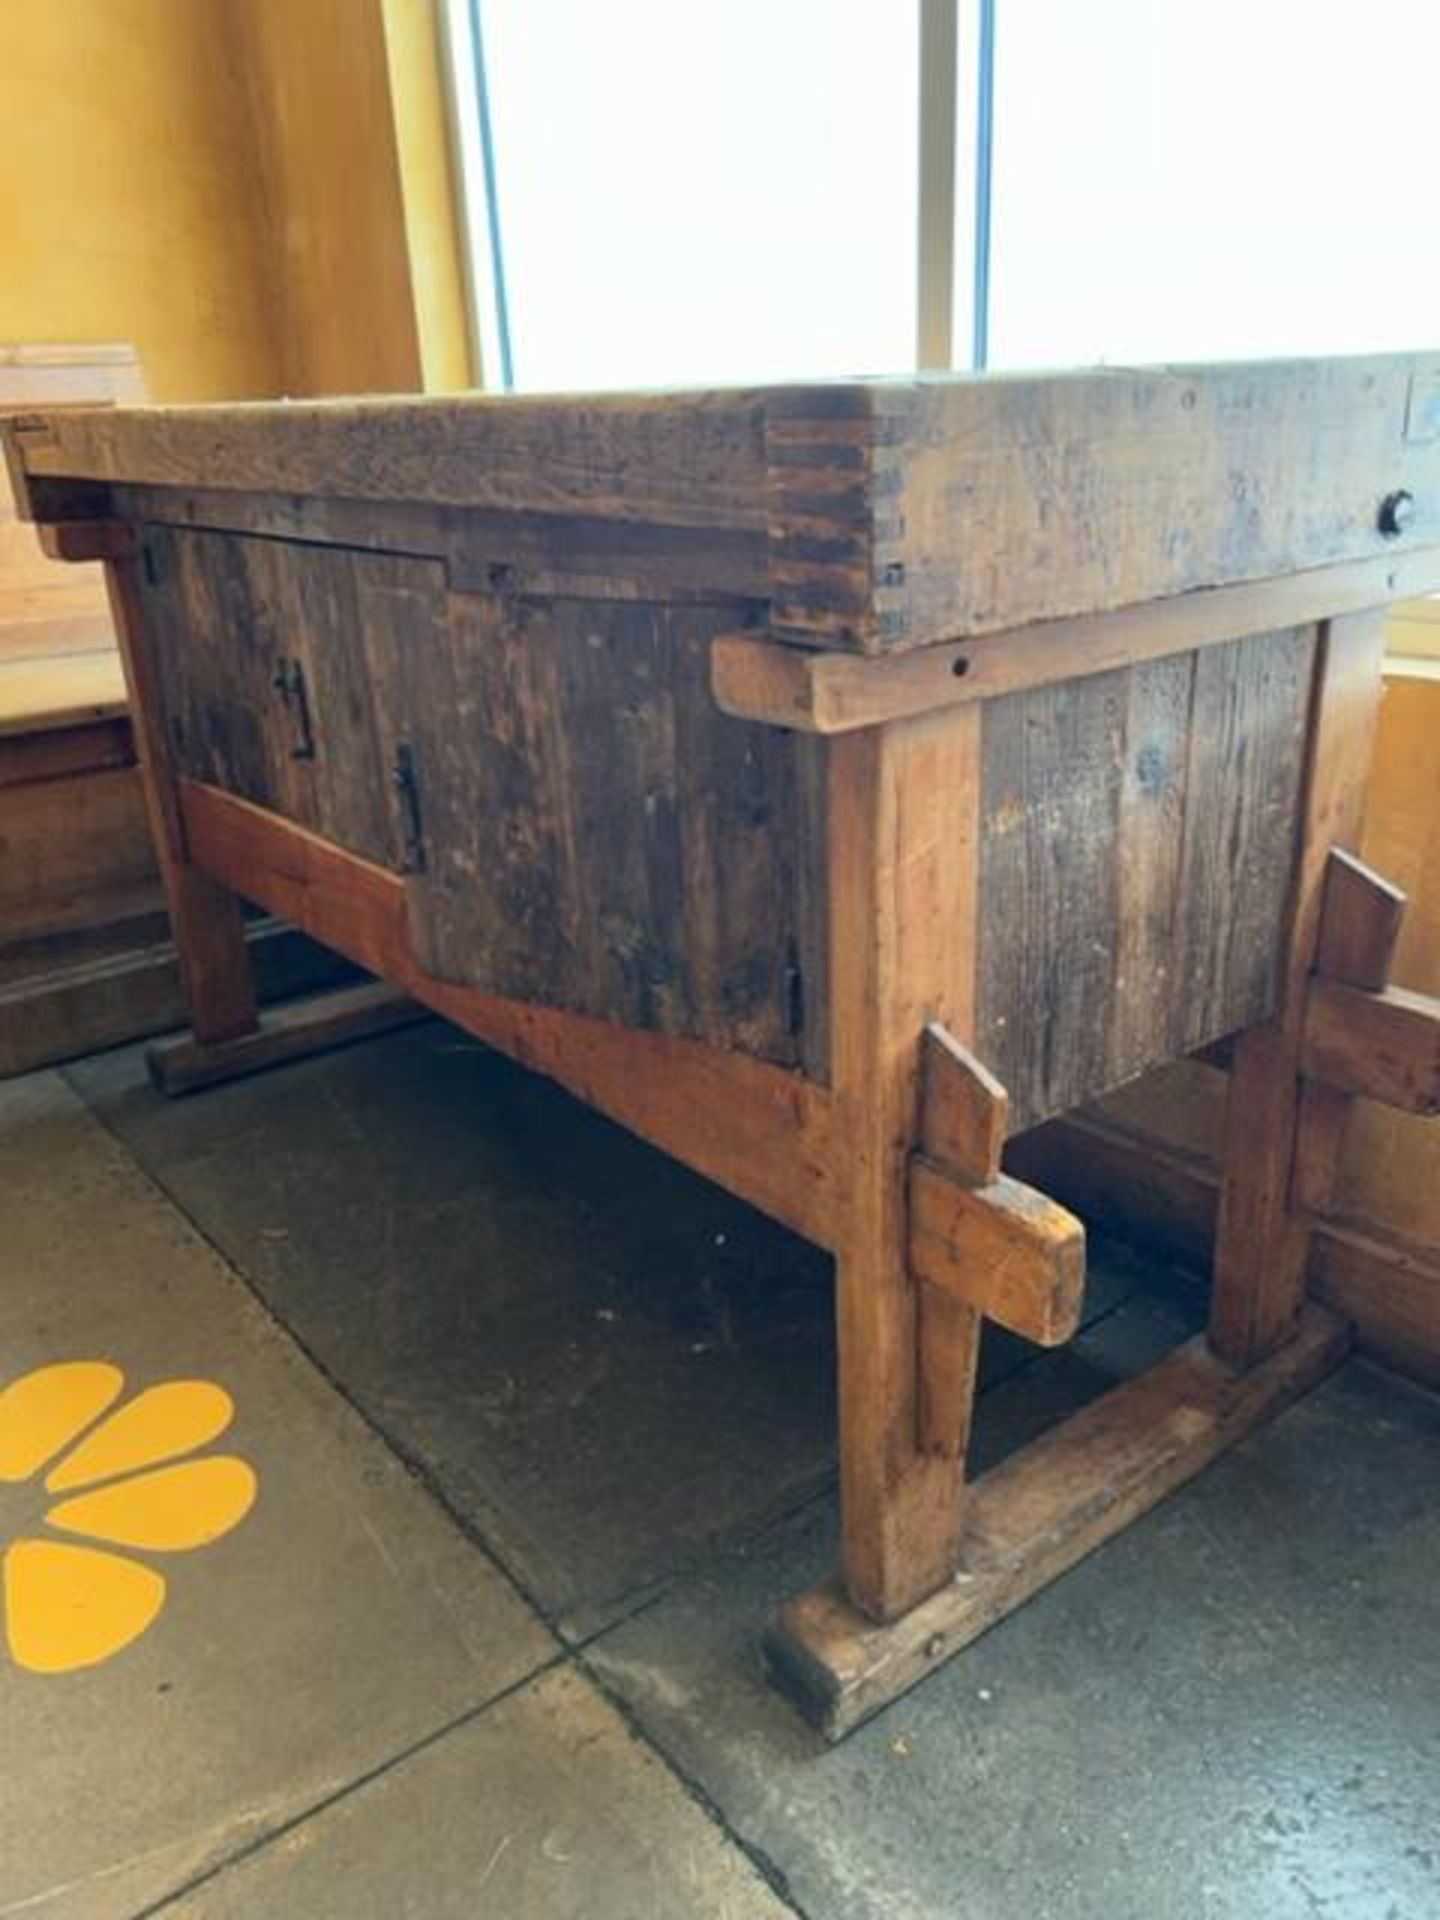 Wood Workers Bench, 57" x 24" - Image 2 of 4